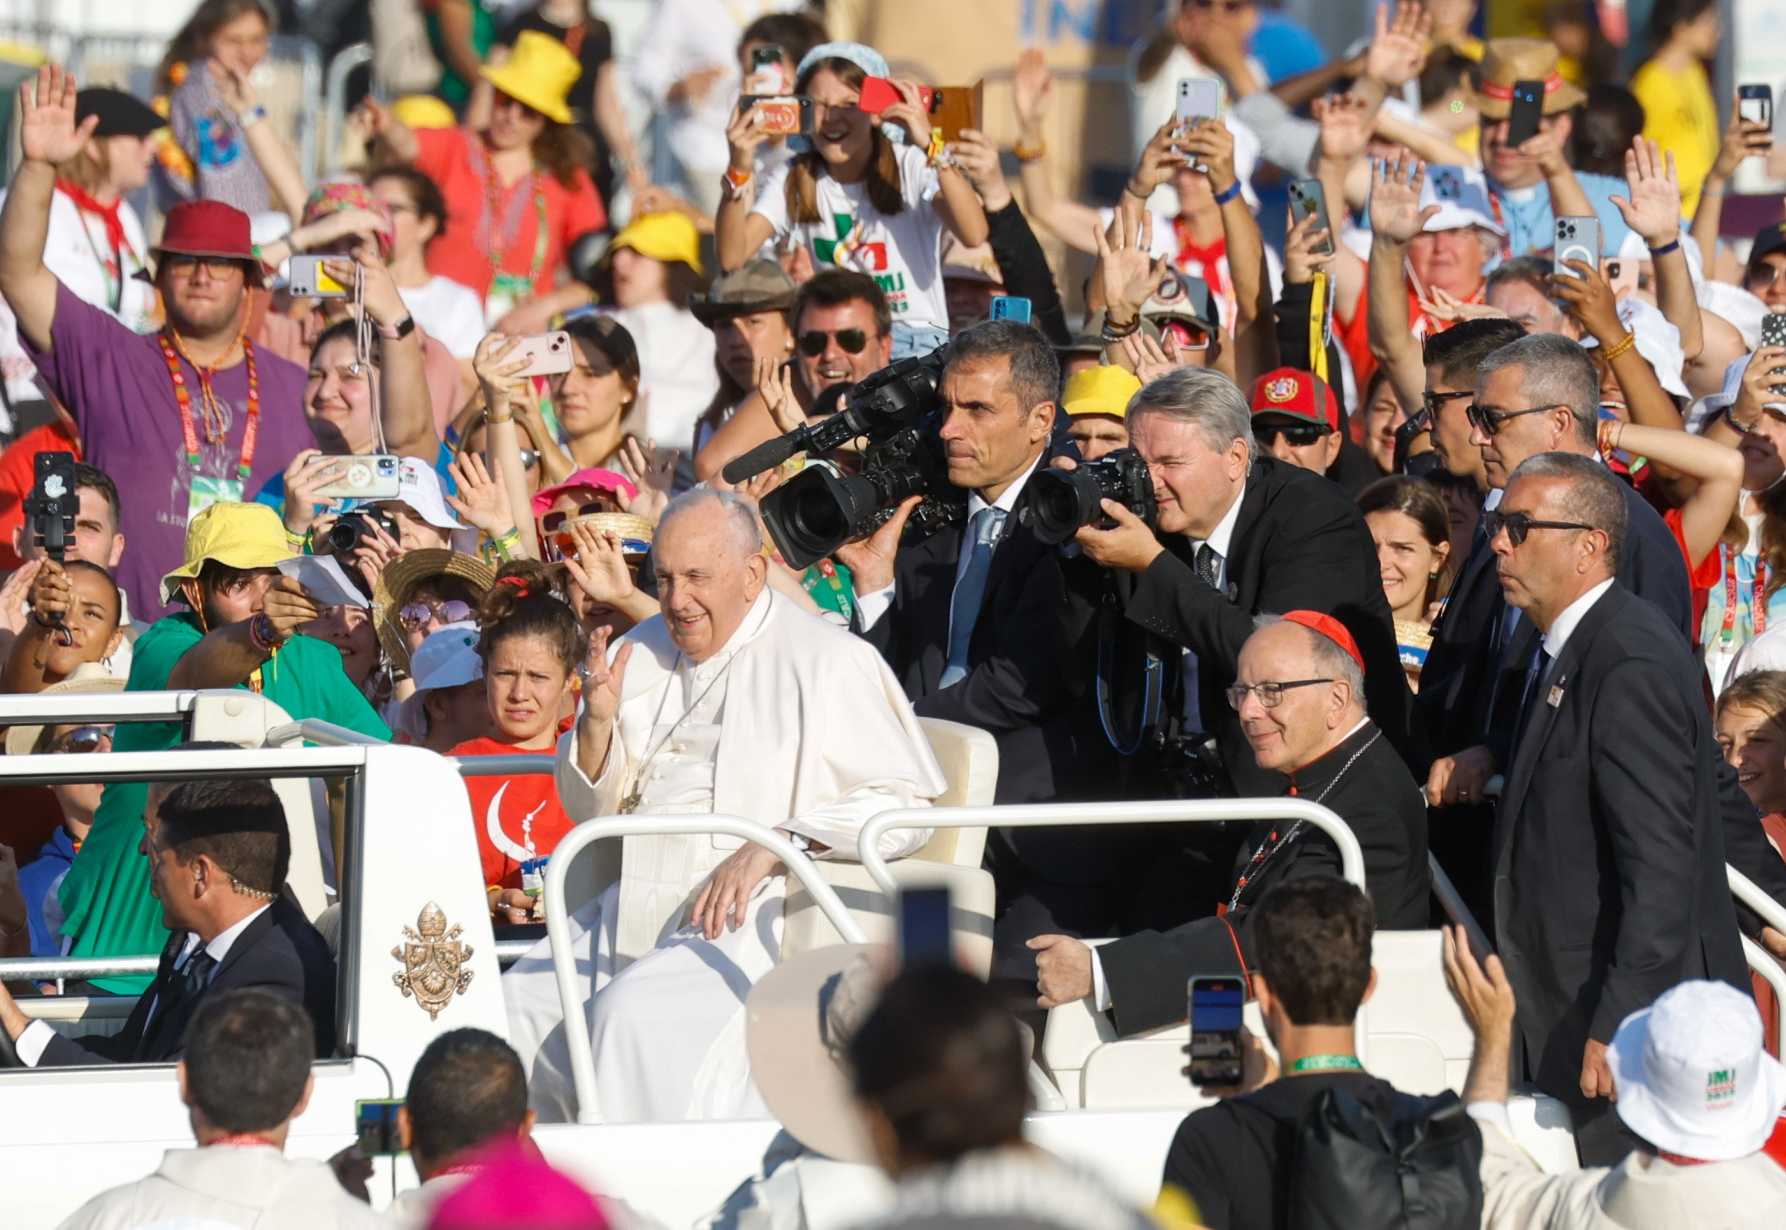 Pope calls for inclusive church while in Portugal for WYD